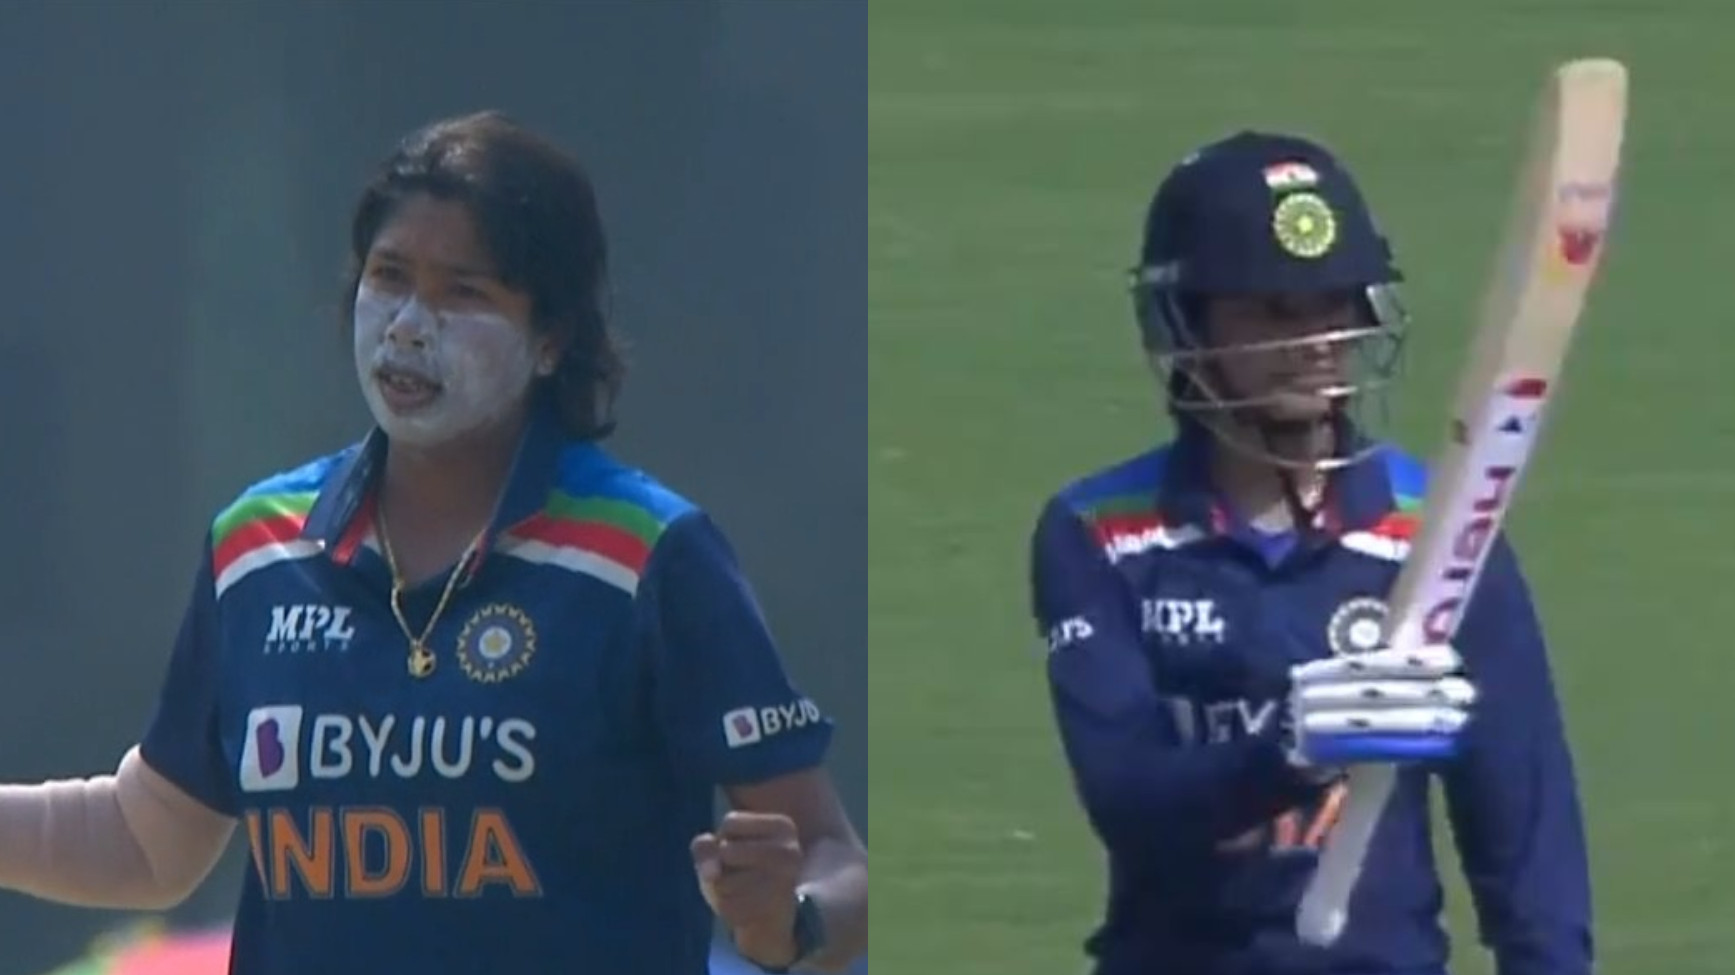 INDW v SAW 2021: Mandhana and Jhulan star as India wins second ODI by 9 wickets; series level at 1-1